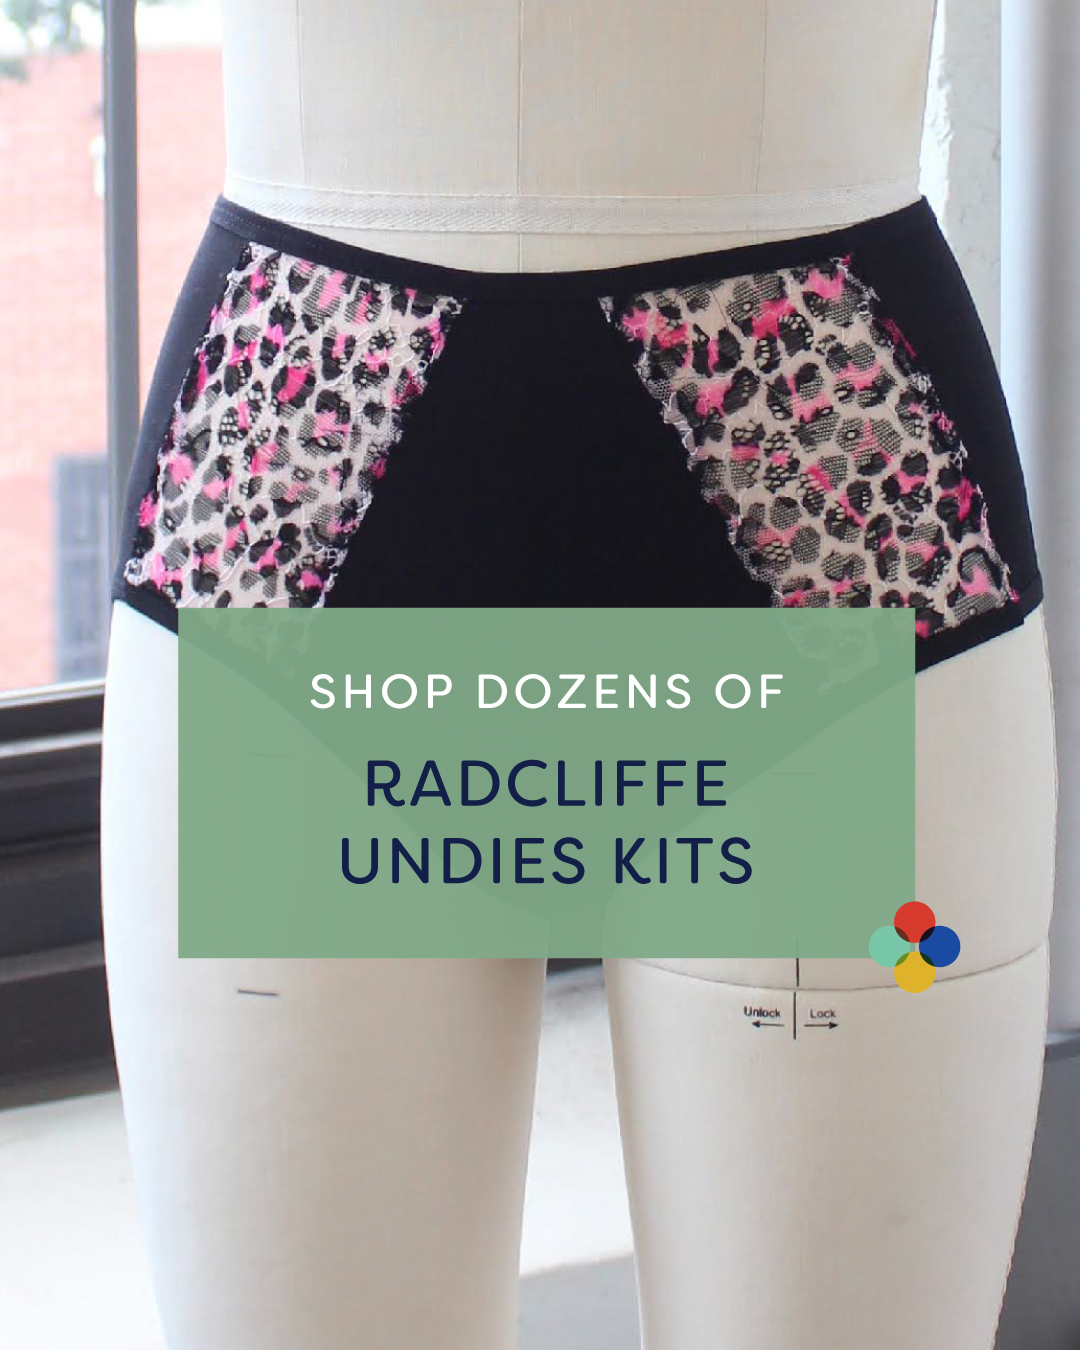 Cashmerette Club: Meet the Radcliffe Undies, the Club pattern for